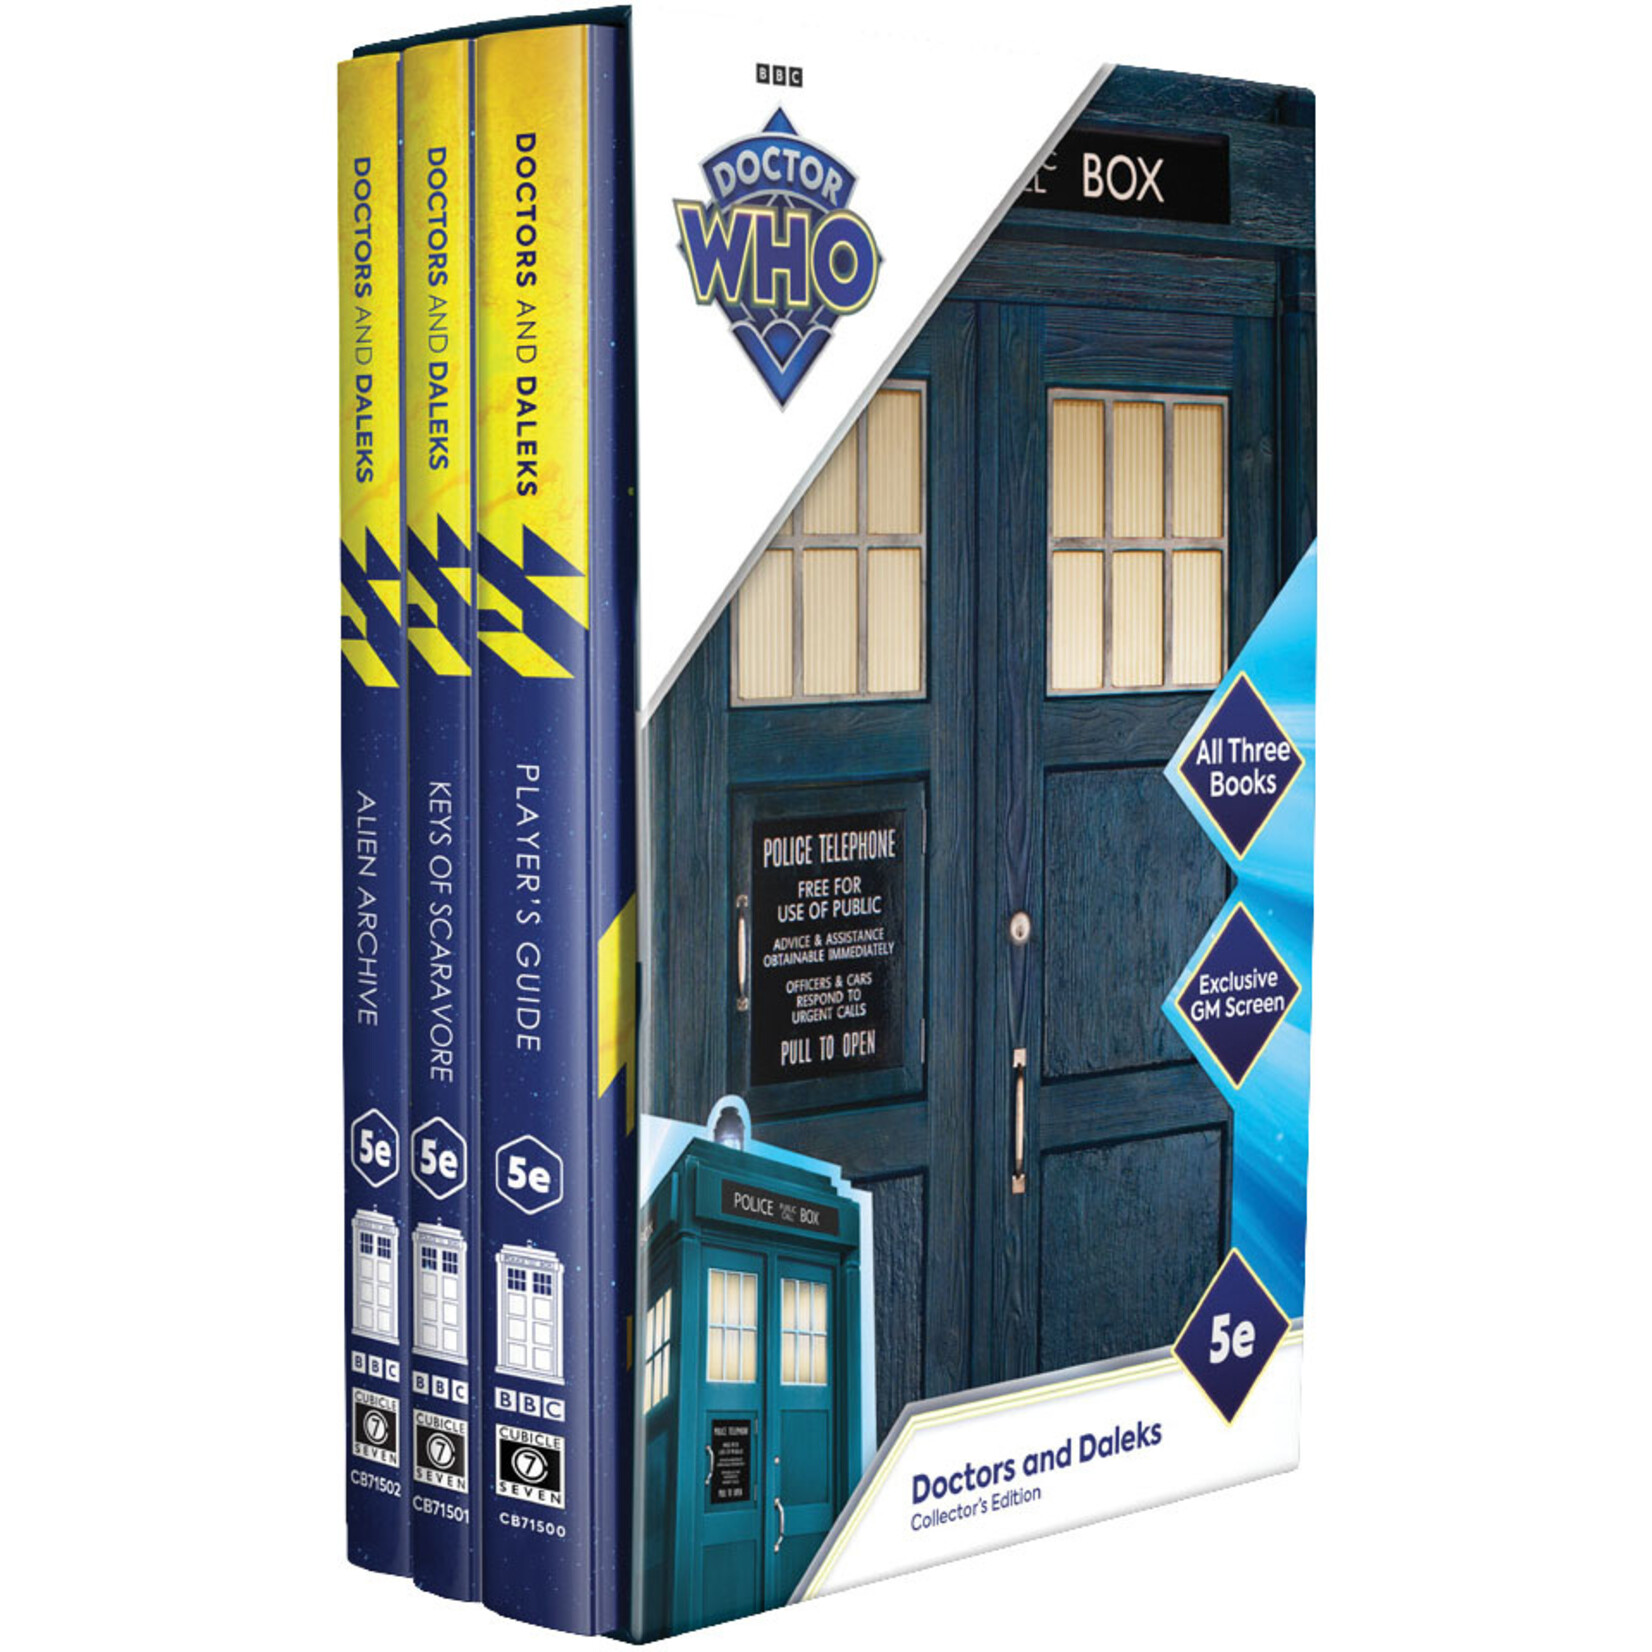 Doctor Who RPG: Doctors and Daleks - Collector's Edition (5E)